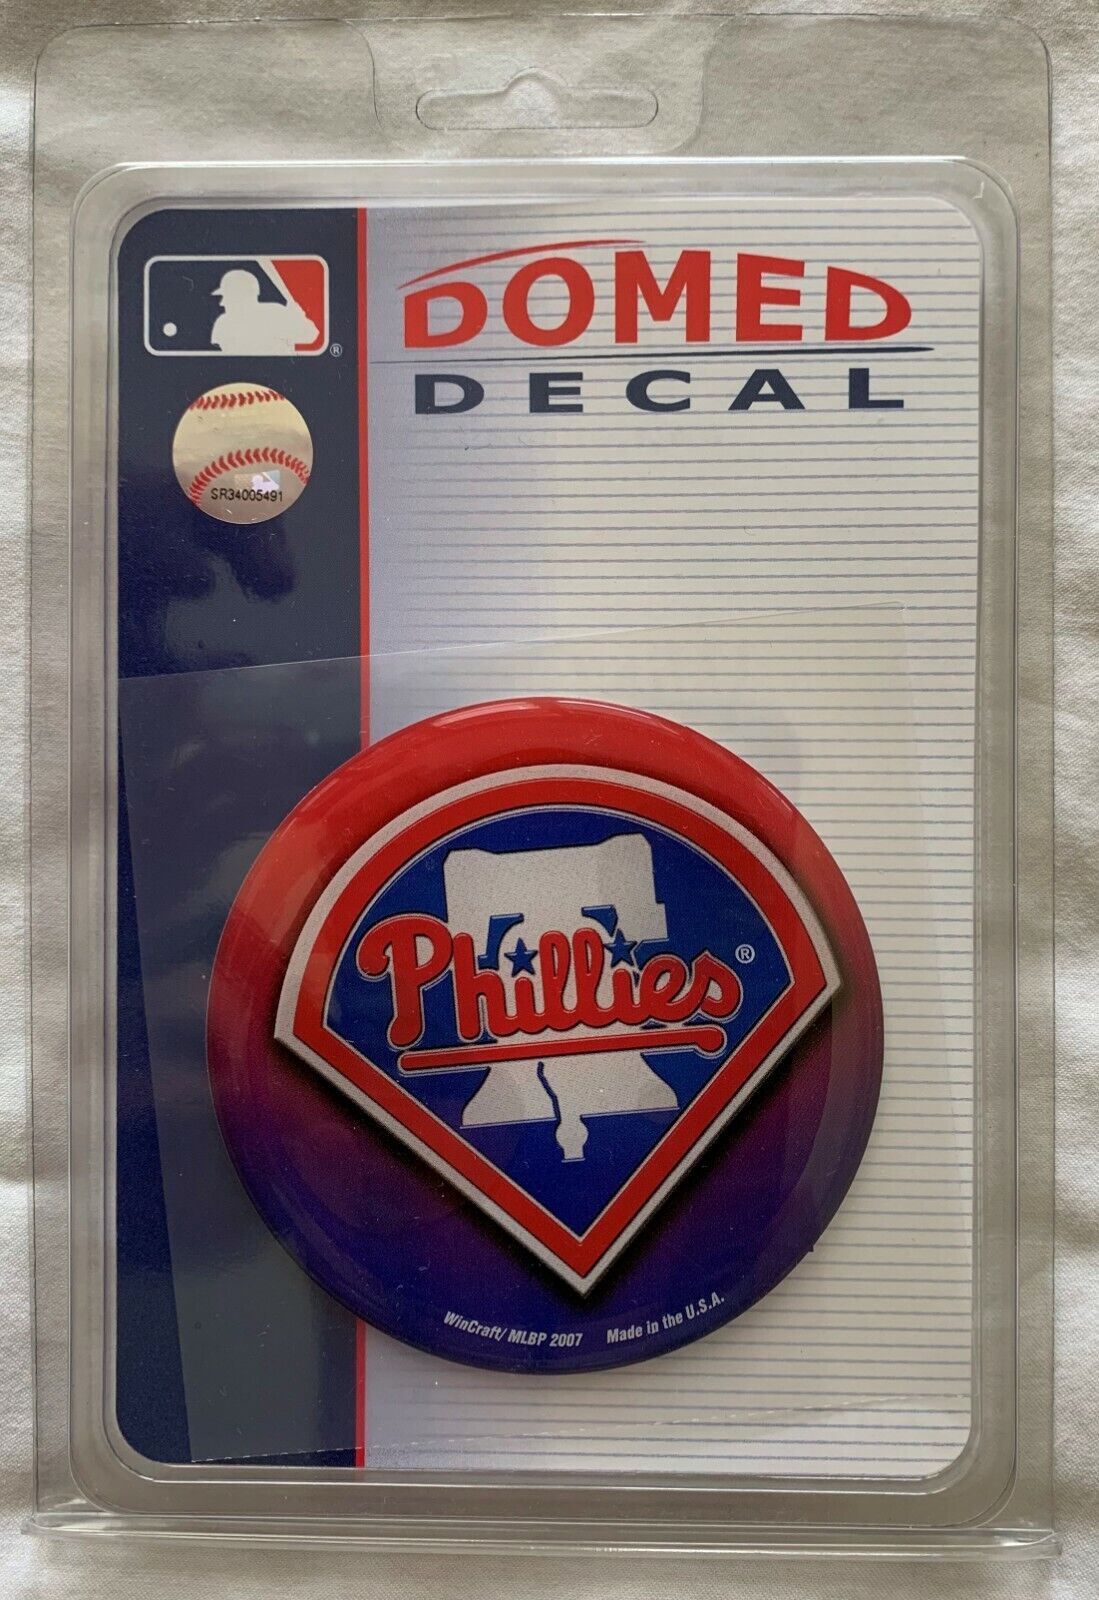 WinCraft Philadelphia Phillies MLB  Domed Decal - New